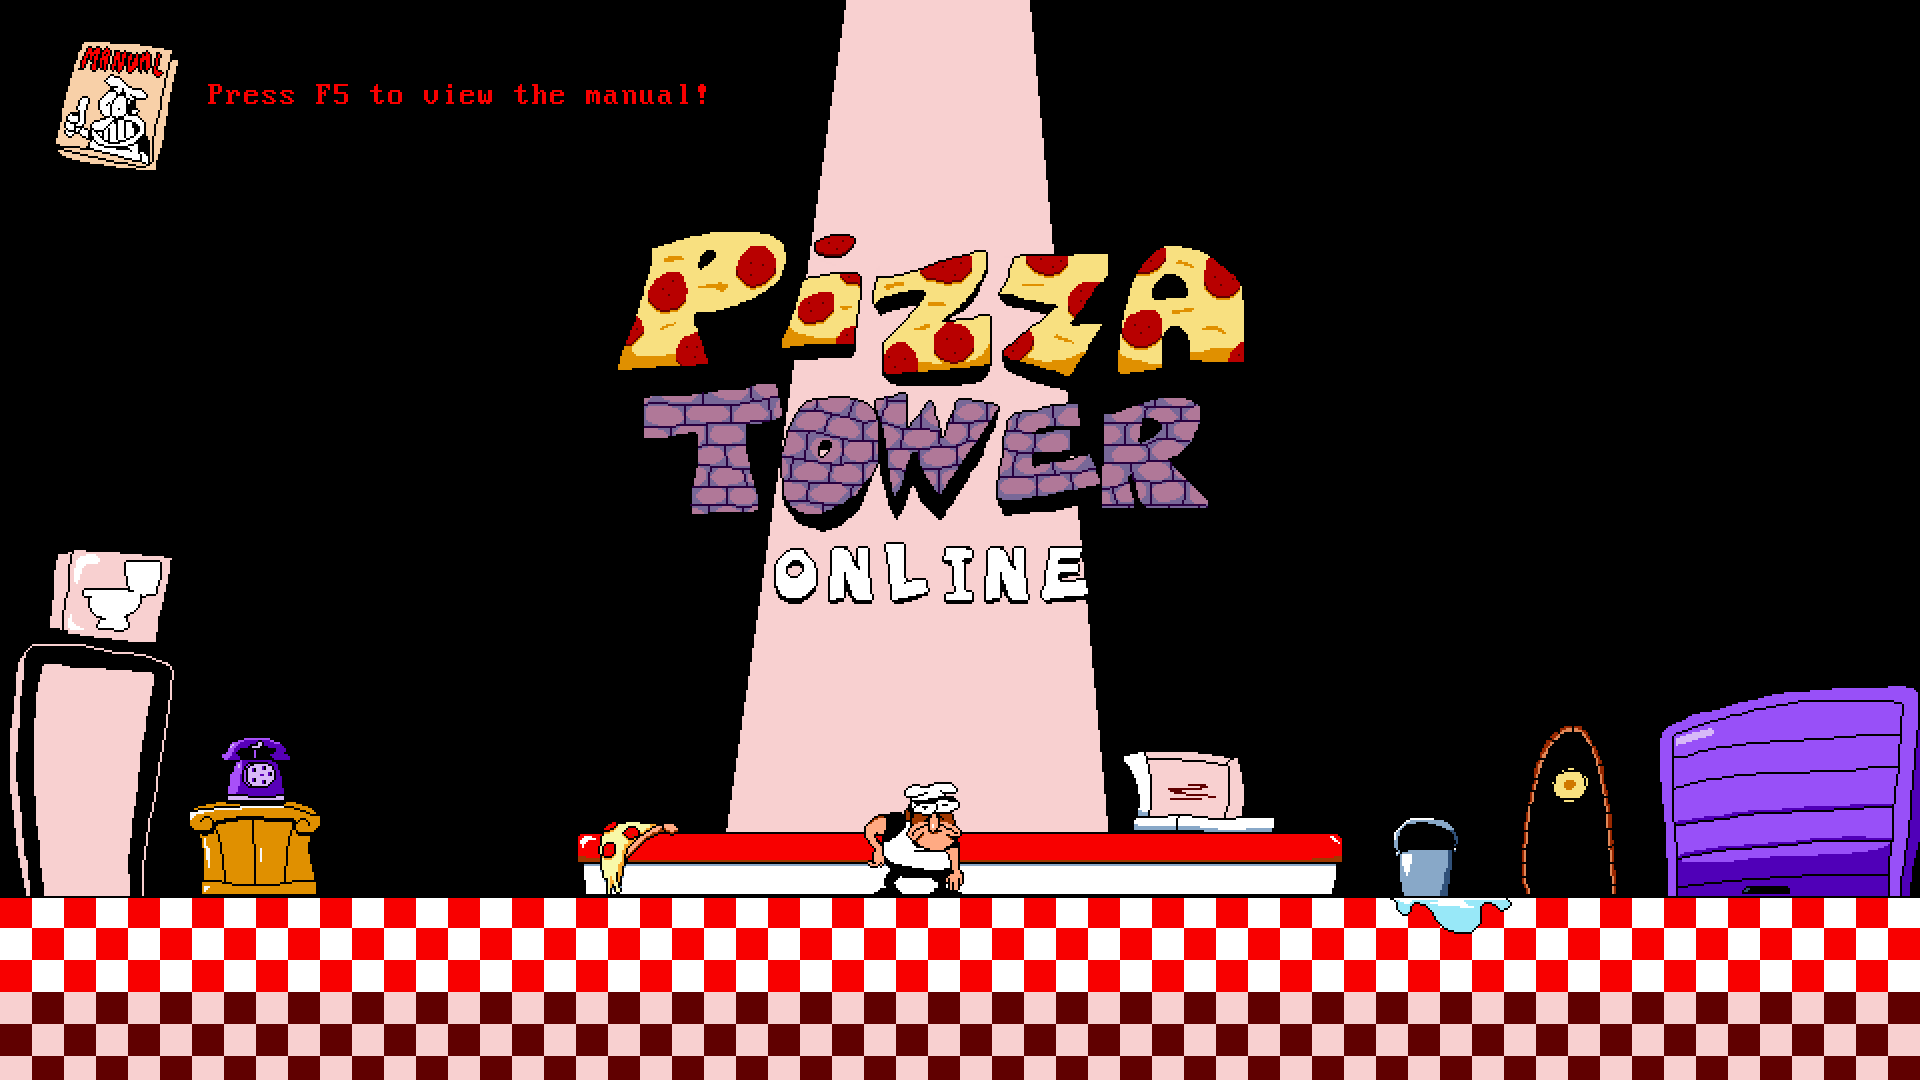 Latest Pizza Tower : Online Game News and Guides